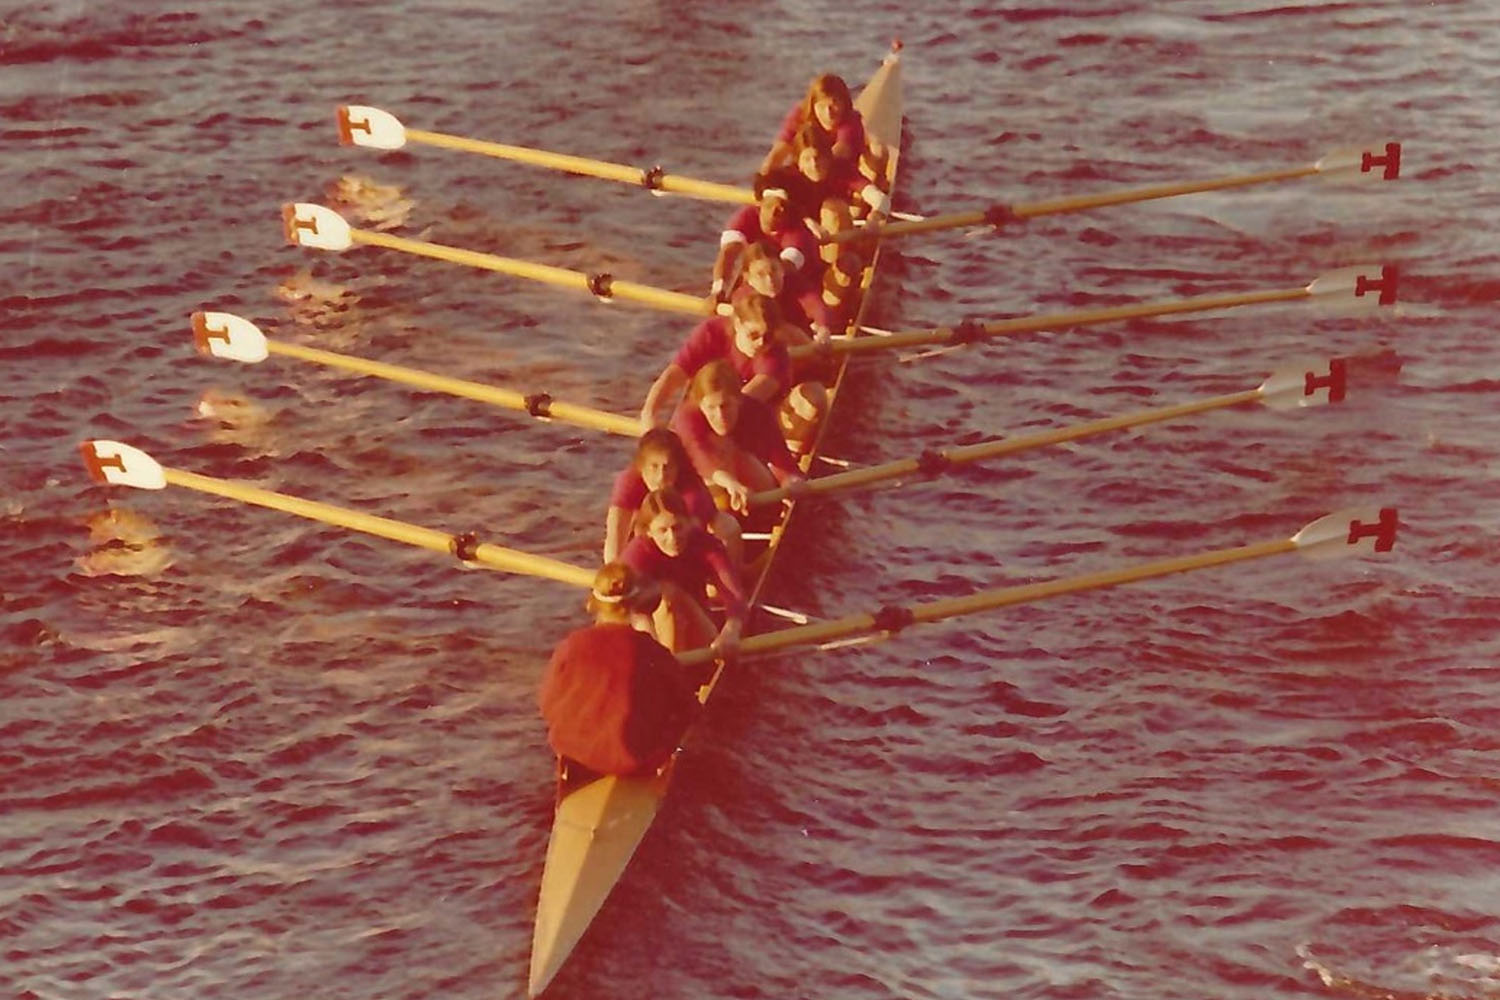 An 8-person shell on the water is shown from above with 8 women rowers and a cox